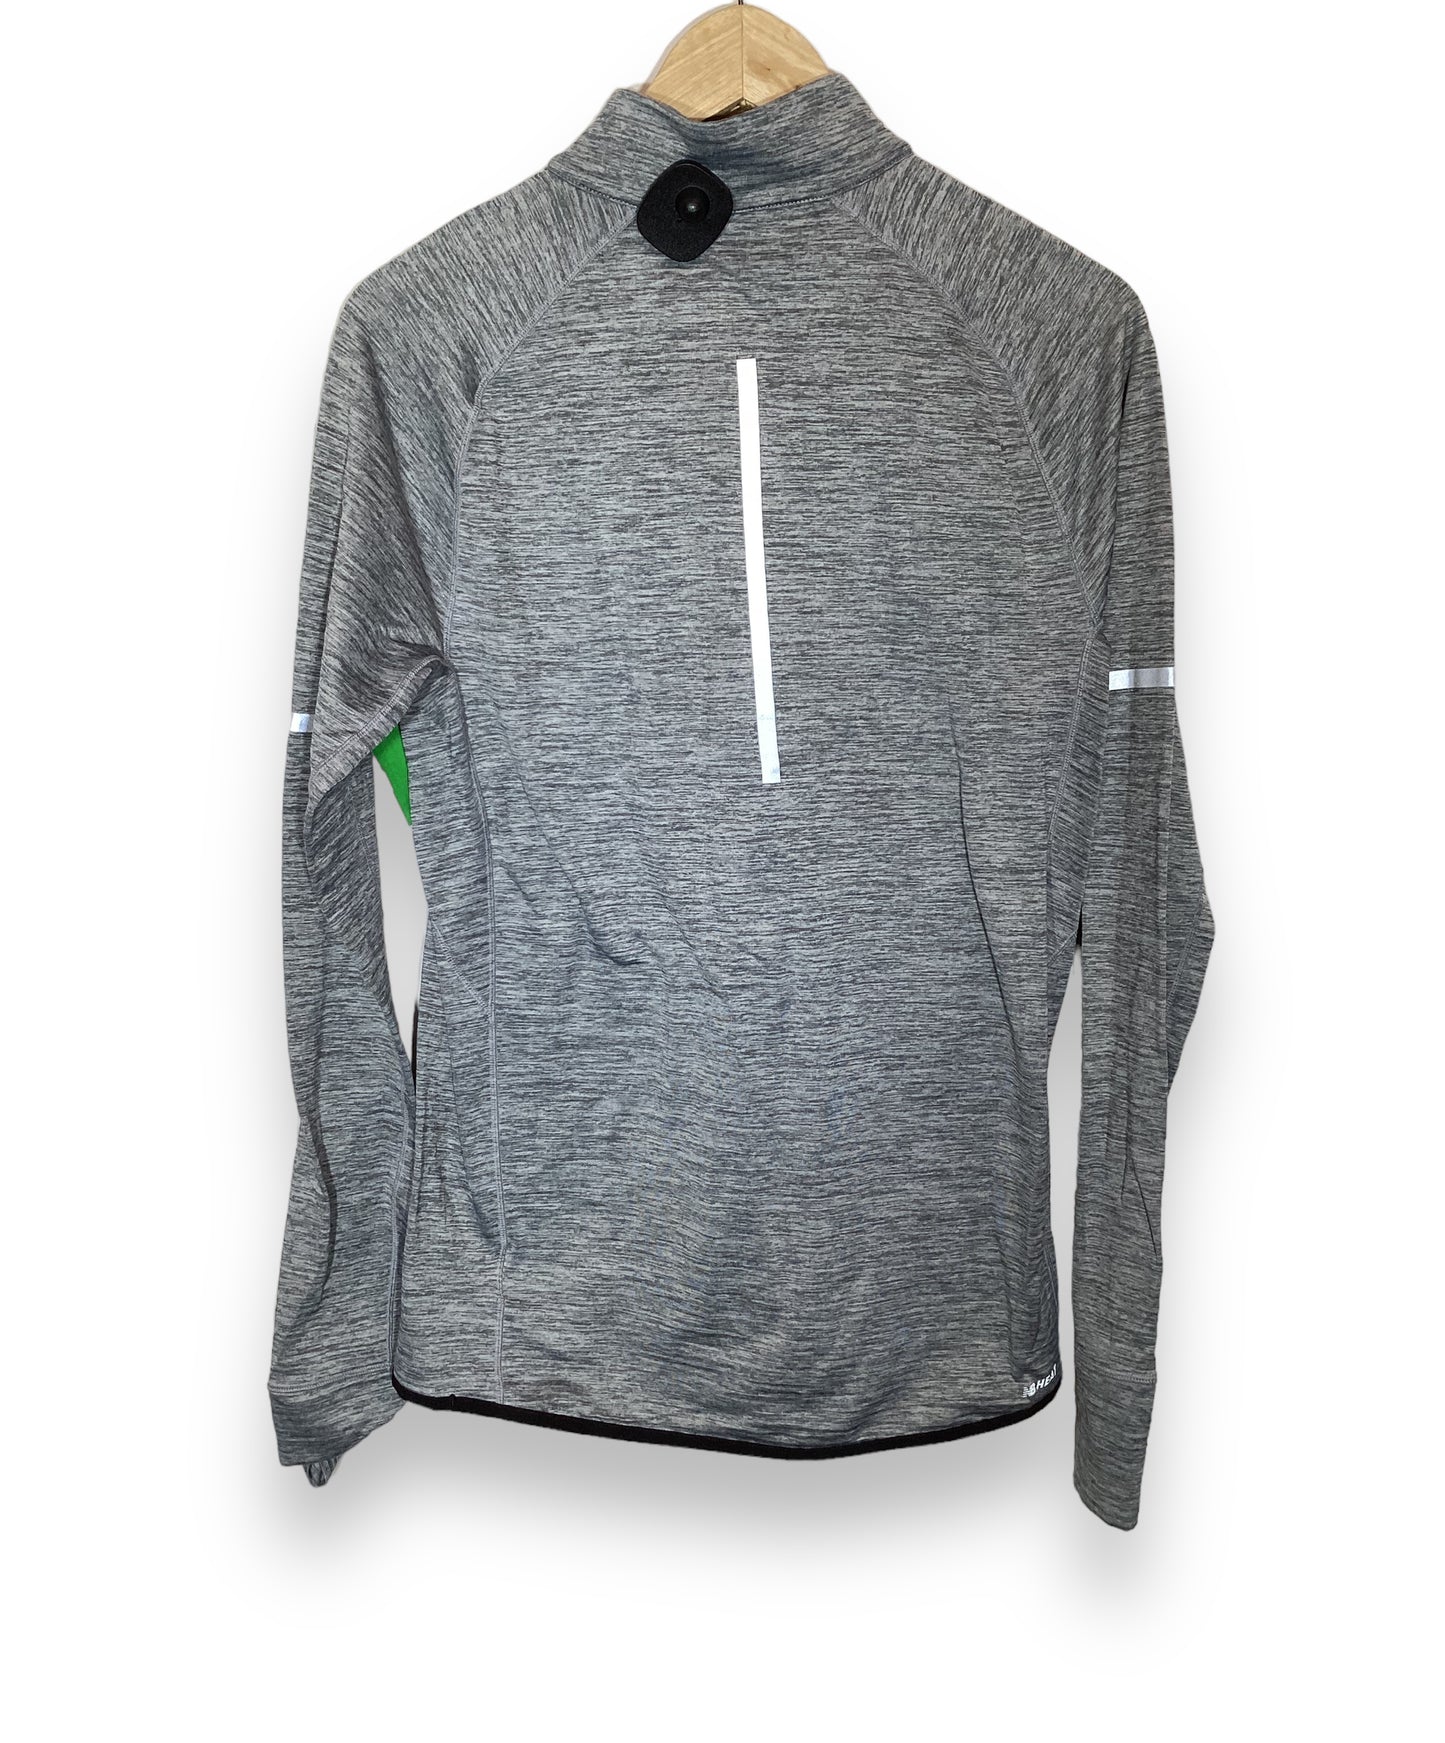 Athletic Top Long Sleeve Collar By New Balance  Size: S